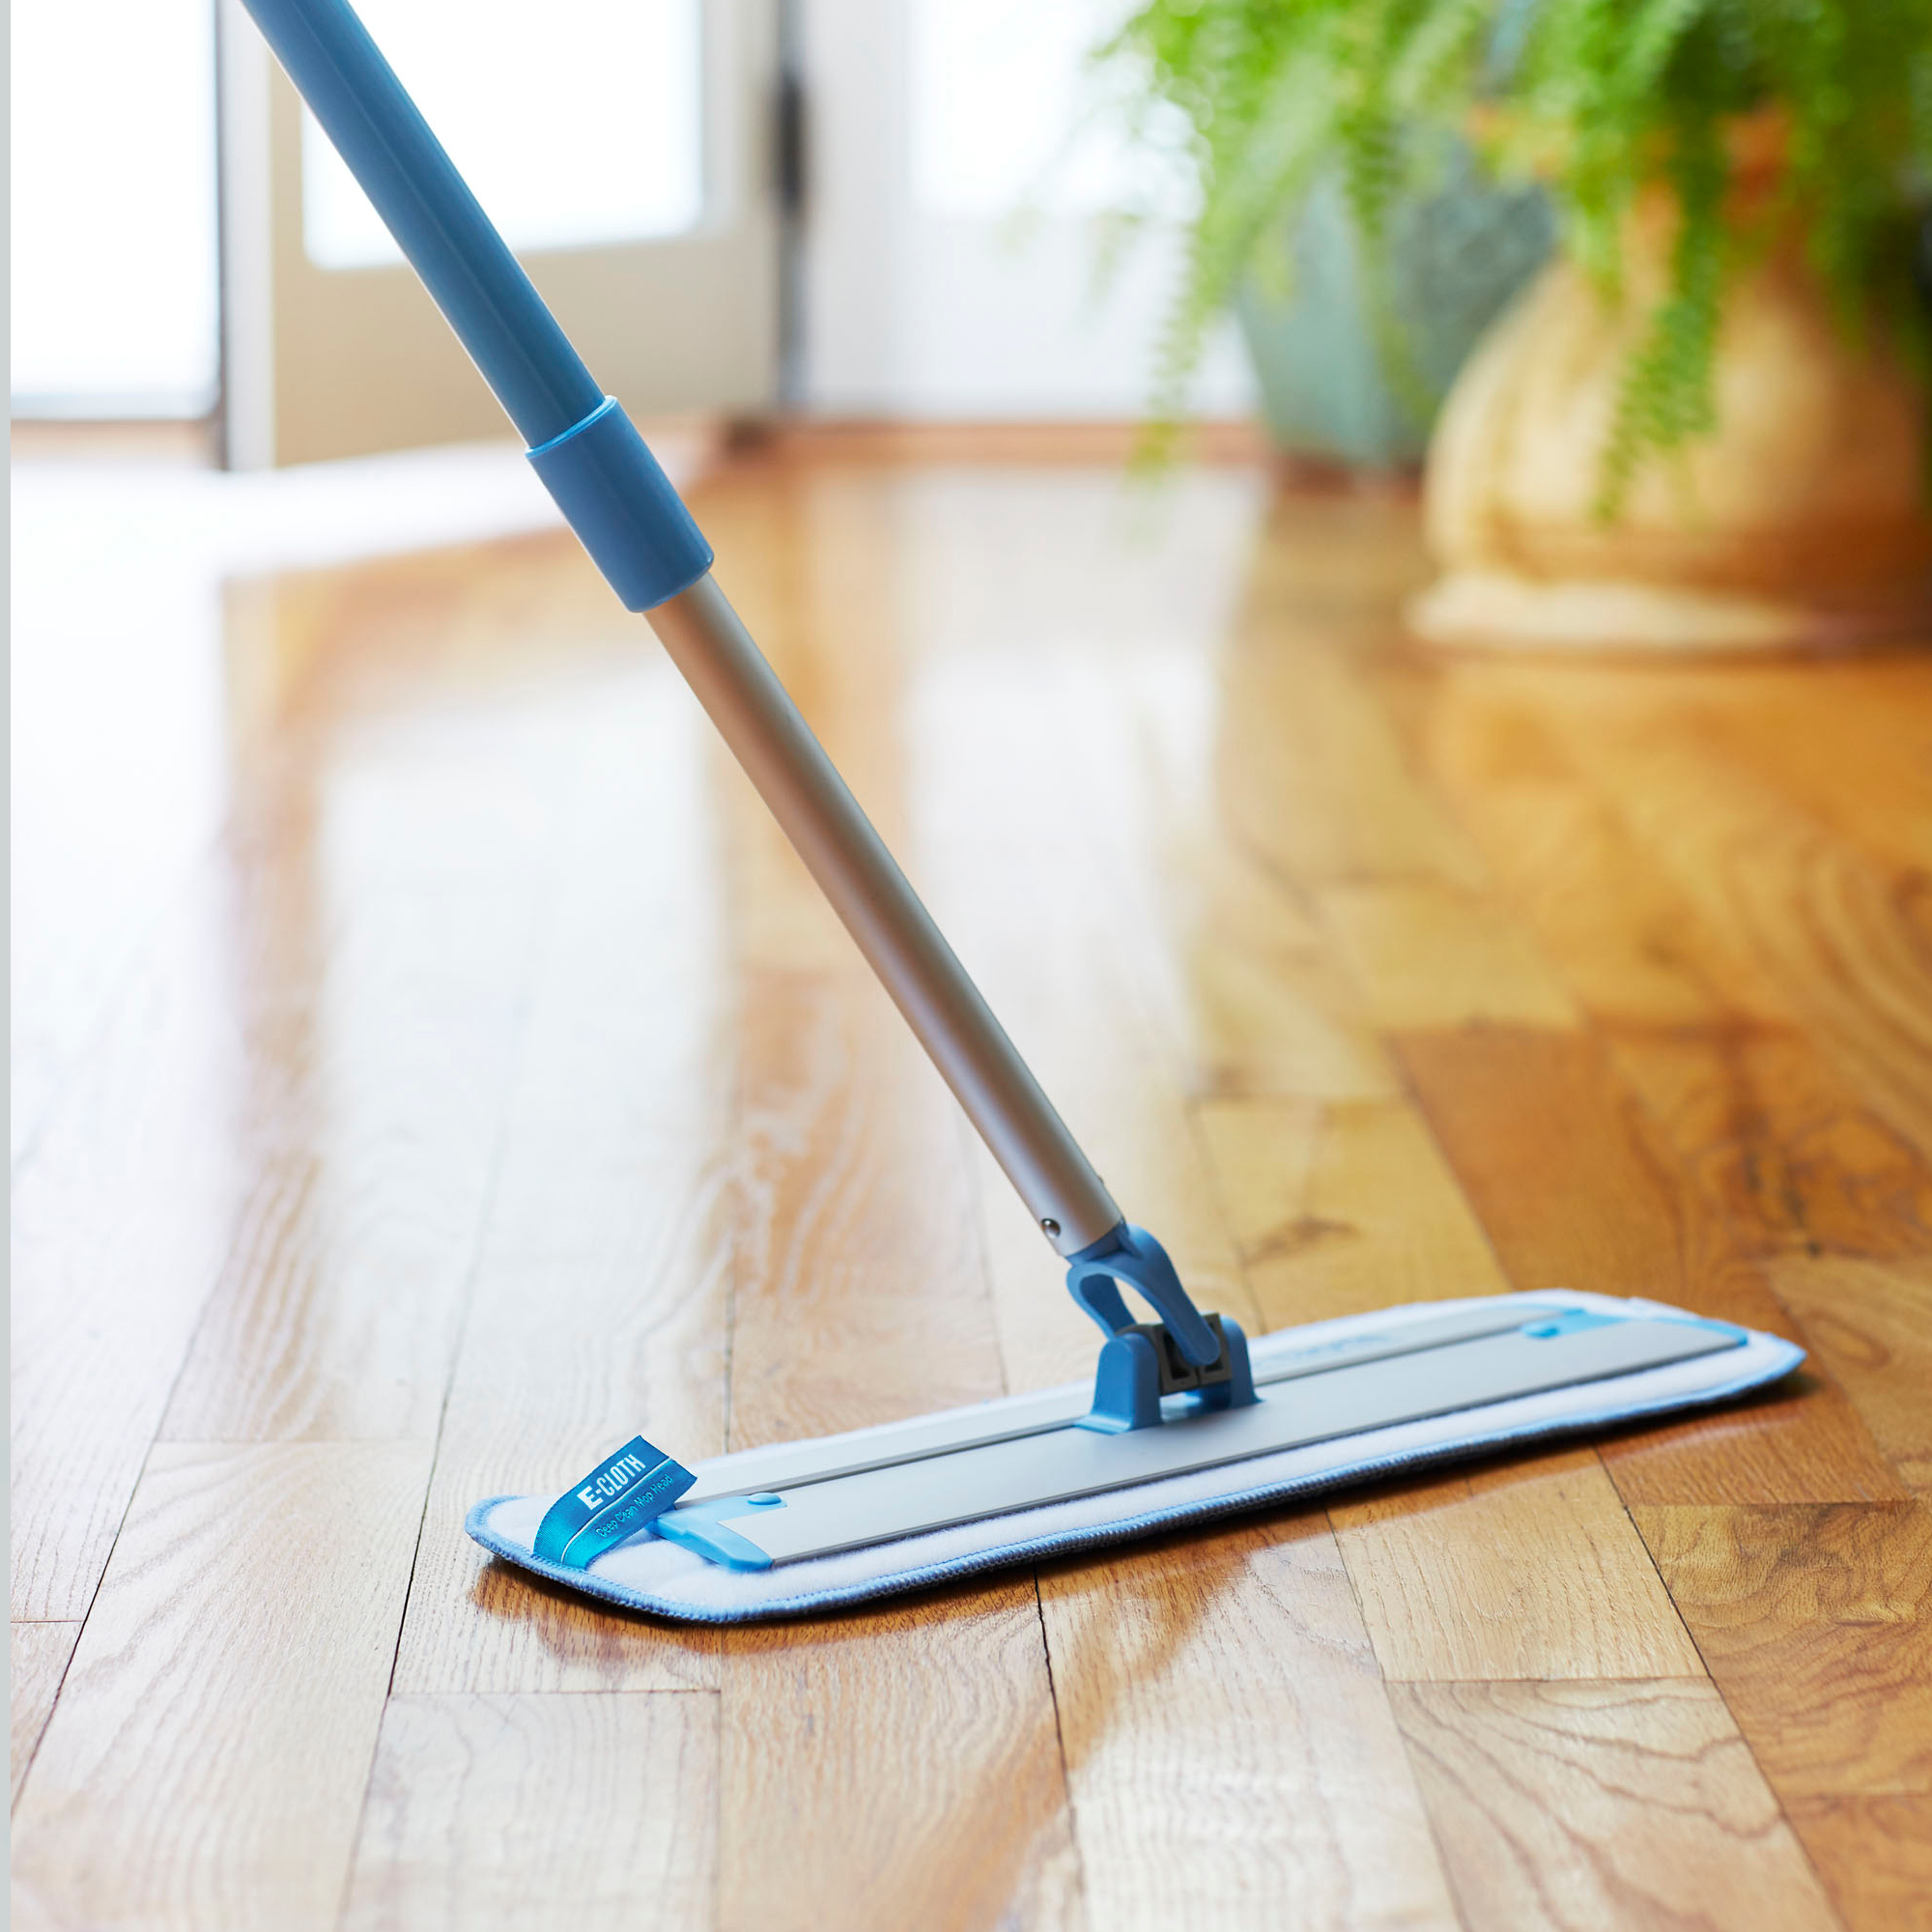 The Microfiber Mop: How to Go Green With Your Cleaning Routine